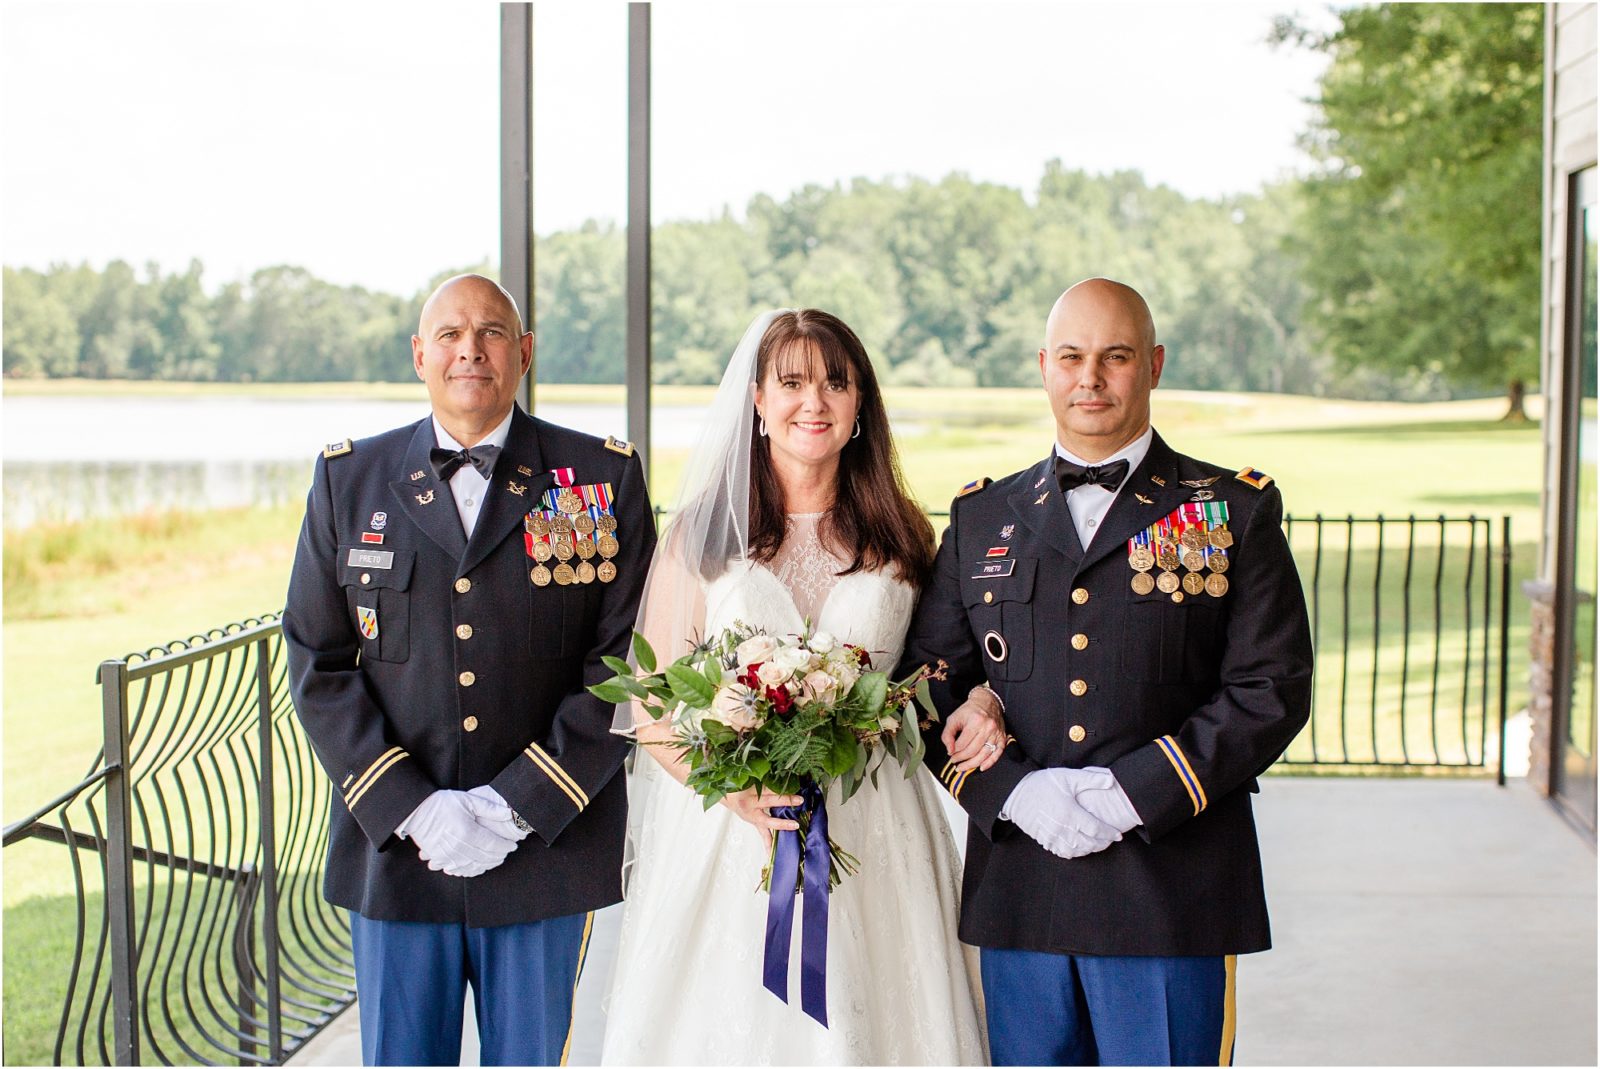 Men in military dress with bride